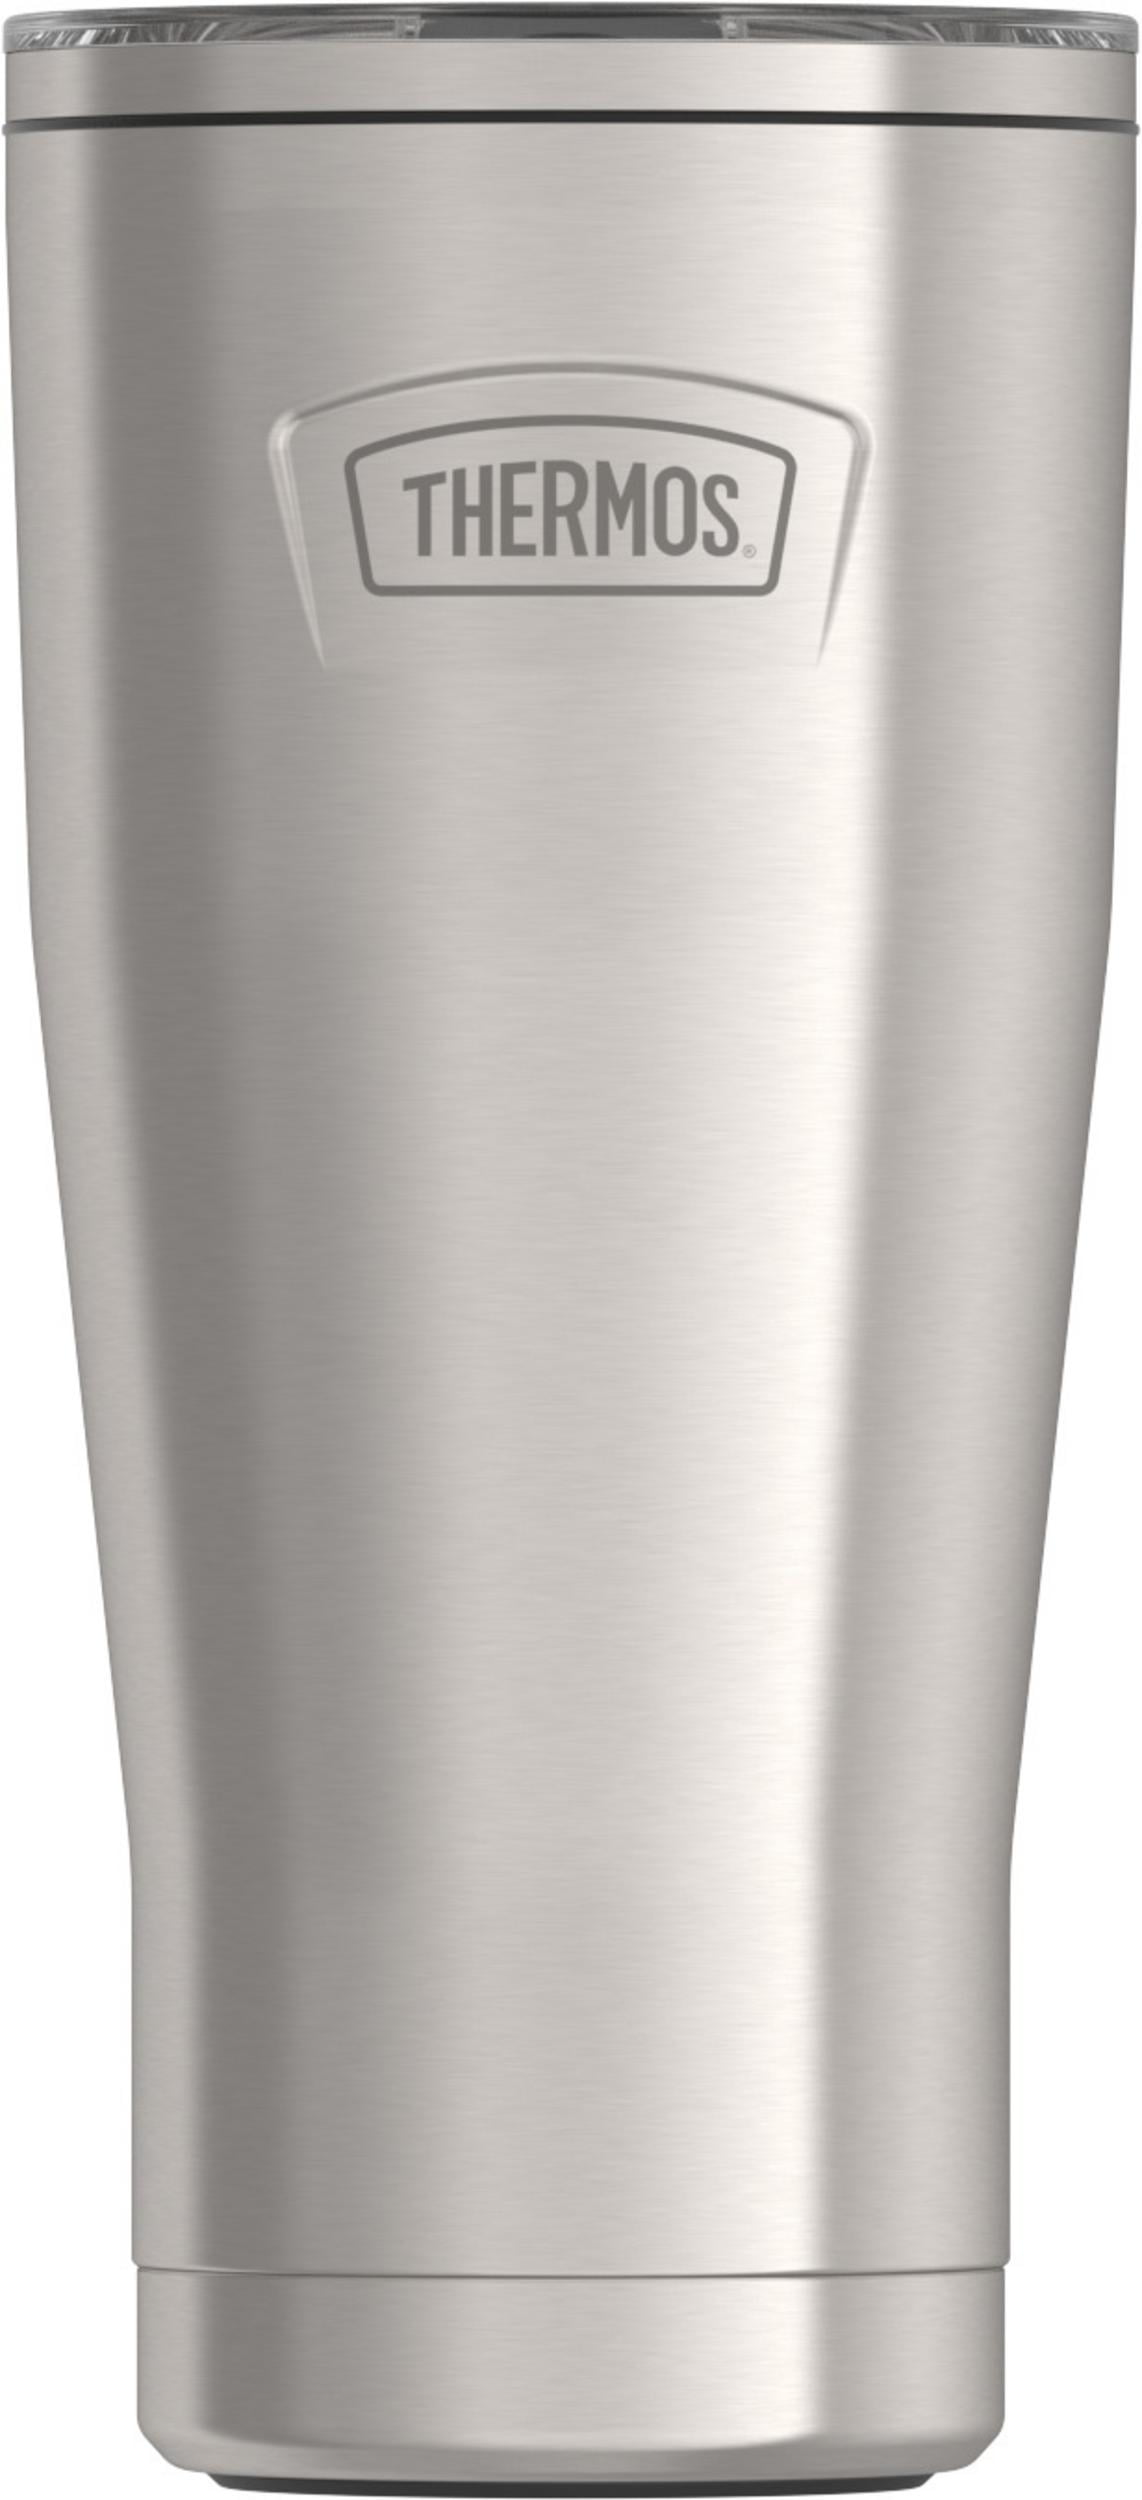 Promotional 17 oz Vacuum-Insulated, Stainless Steel Thermos $15.05